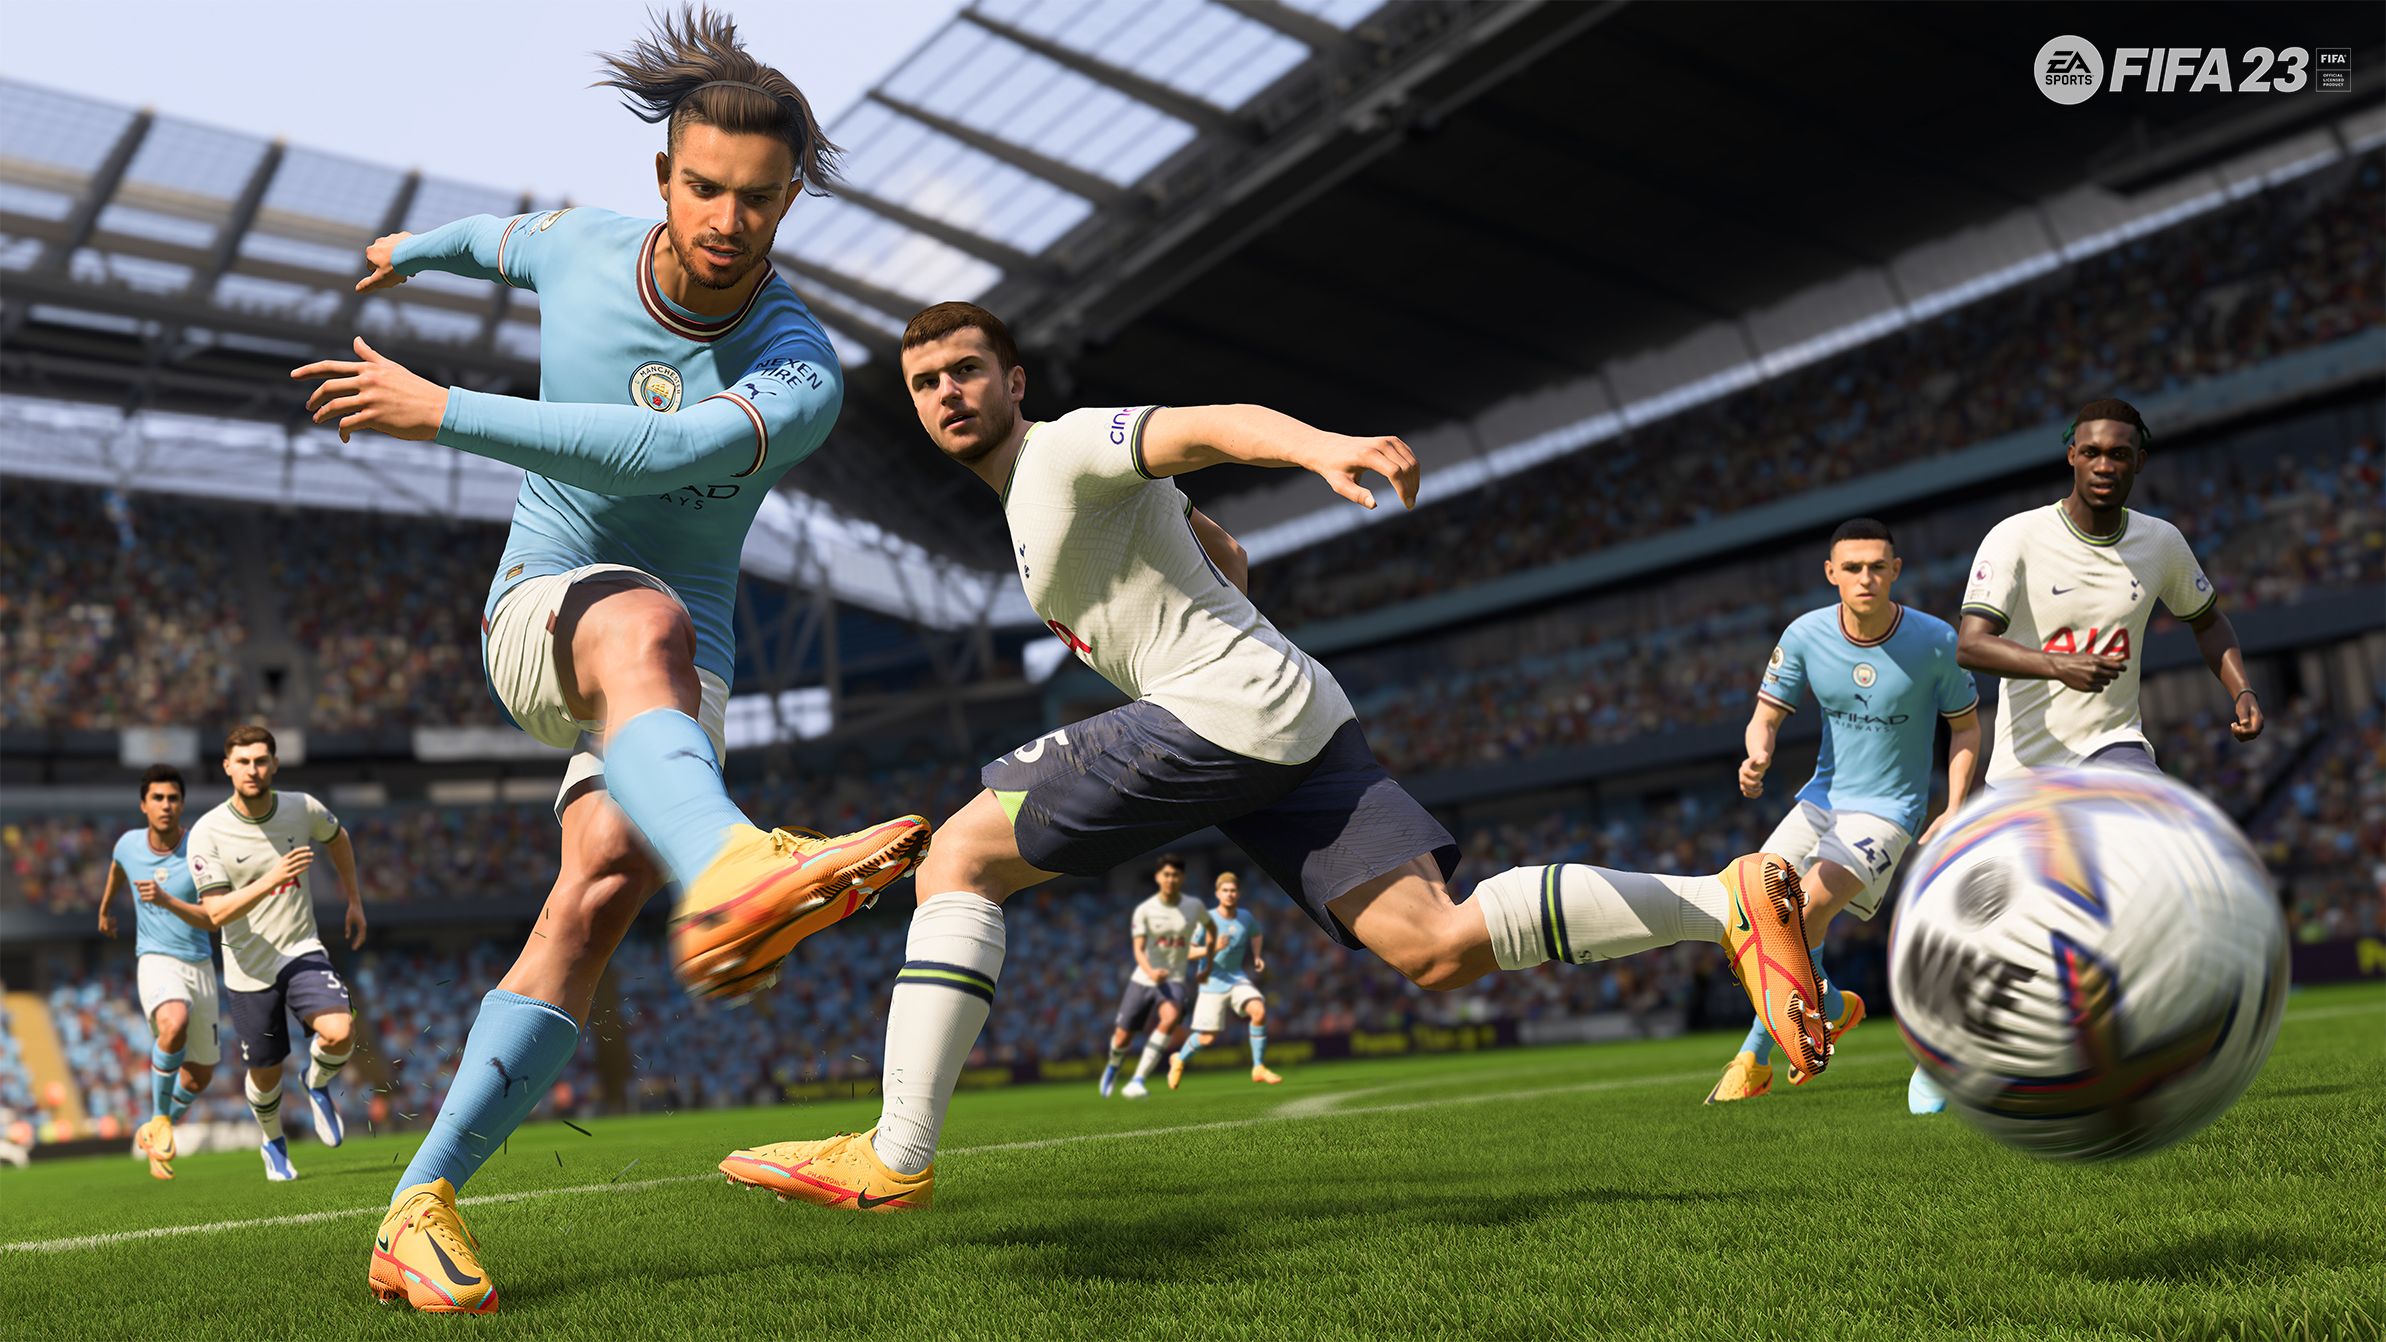 FIFA 23 FREE 🔥🔥 ON STEAM WITH THE FIFA WORLD CUP UPDATE 